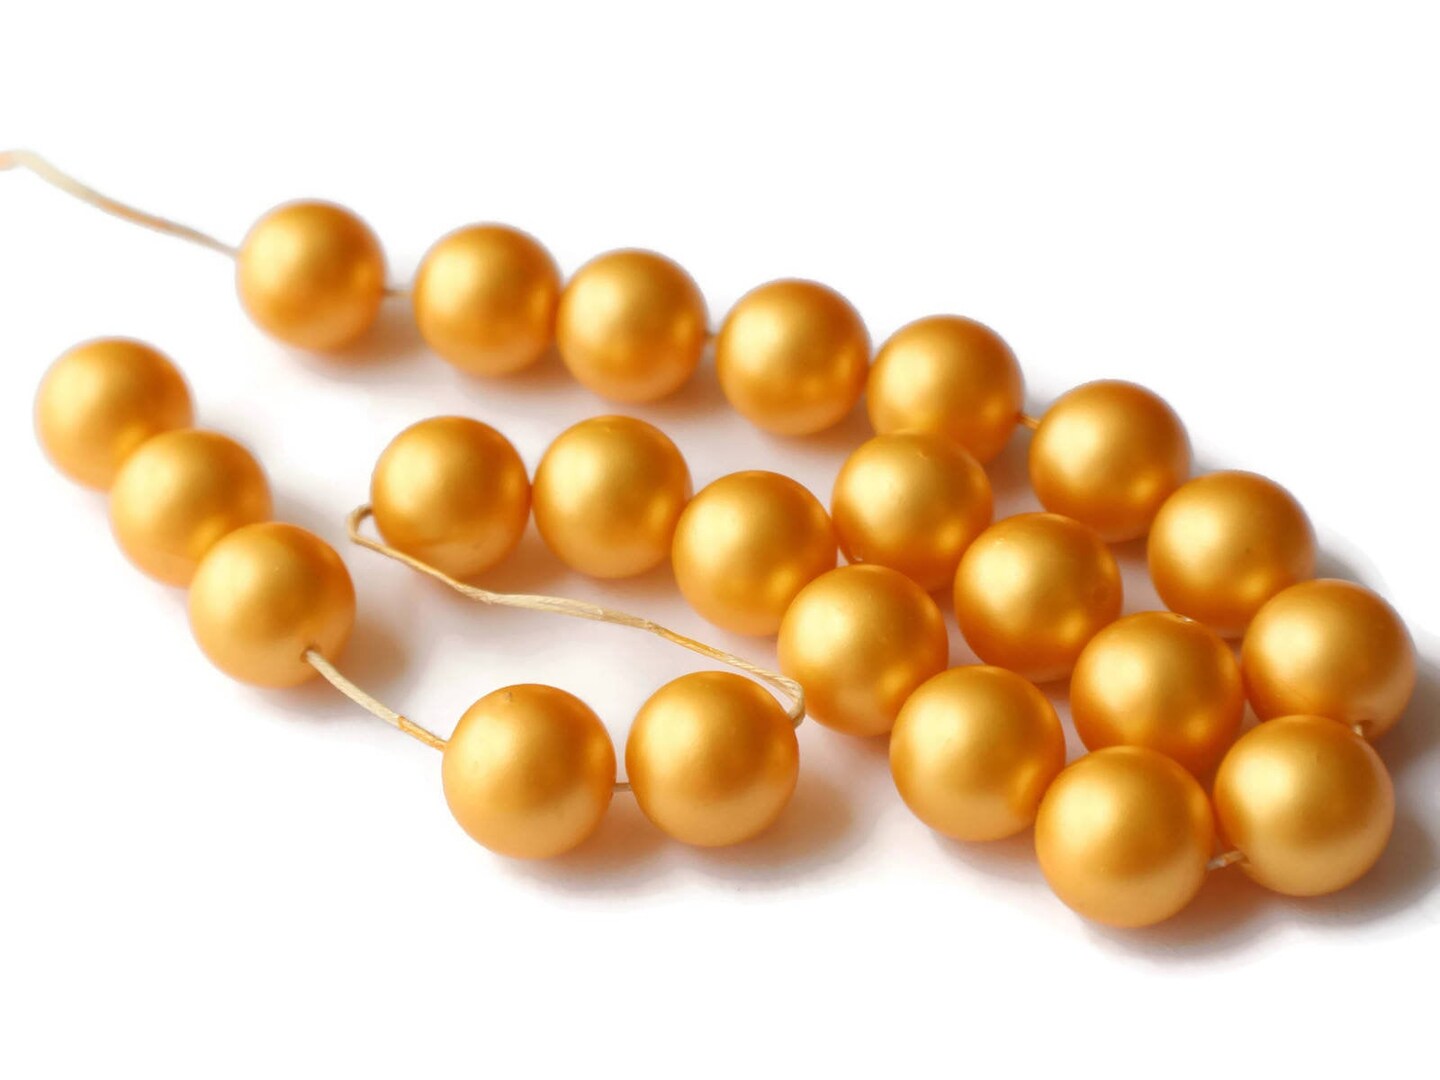 23 14mm Golden Yellow Faux Pearl Beads Vintage New Old Stock Plastic Pearls